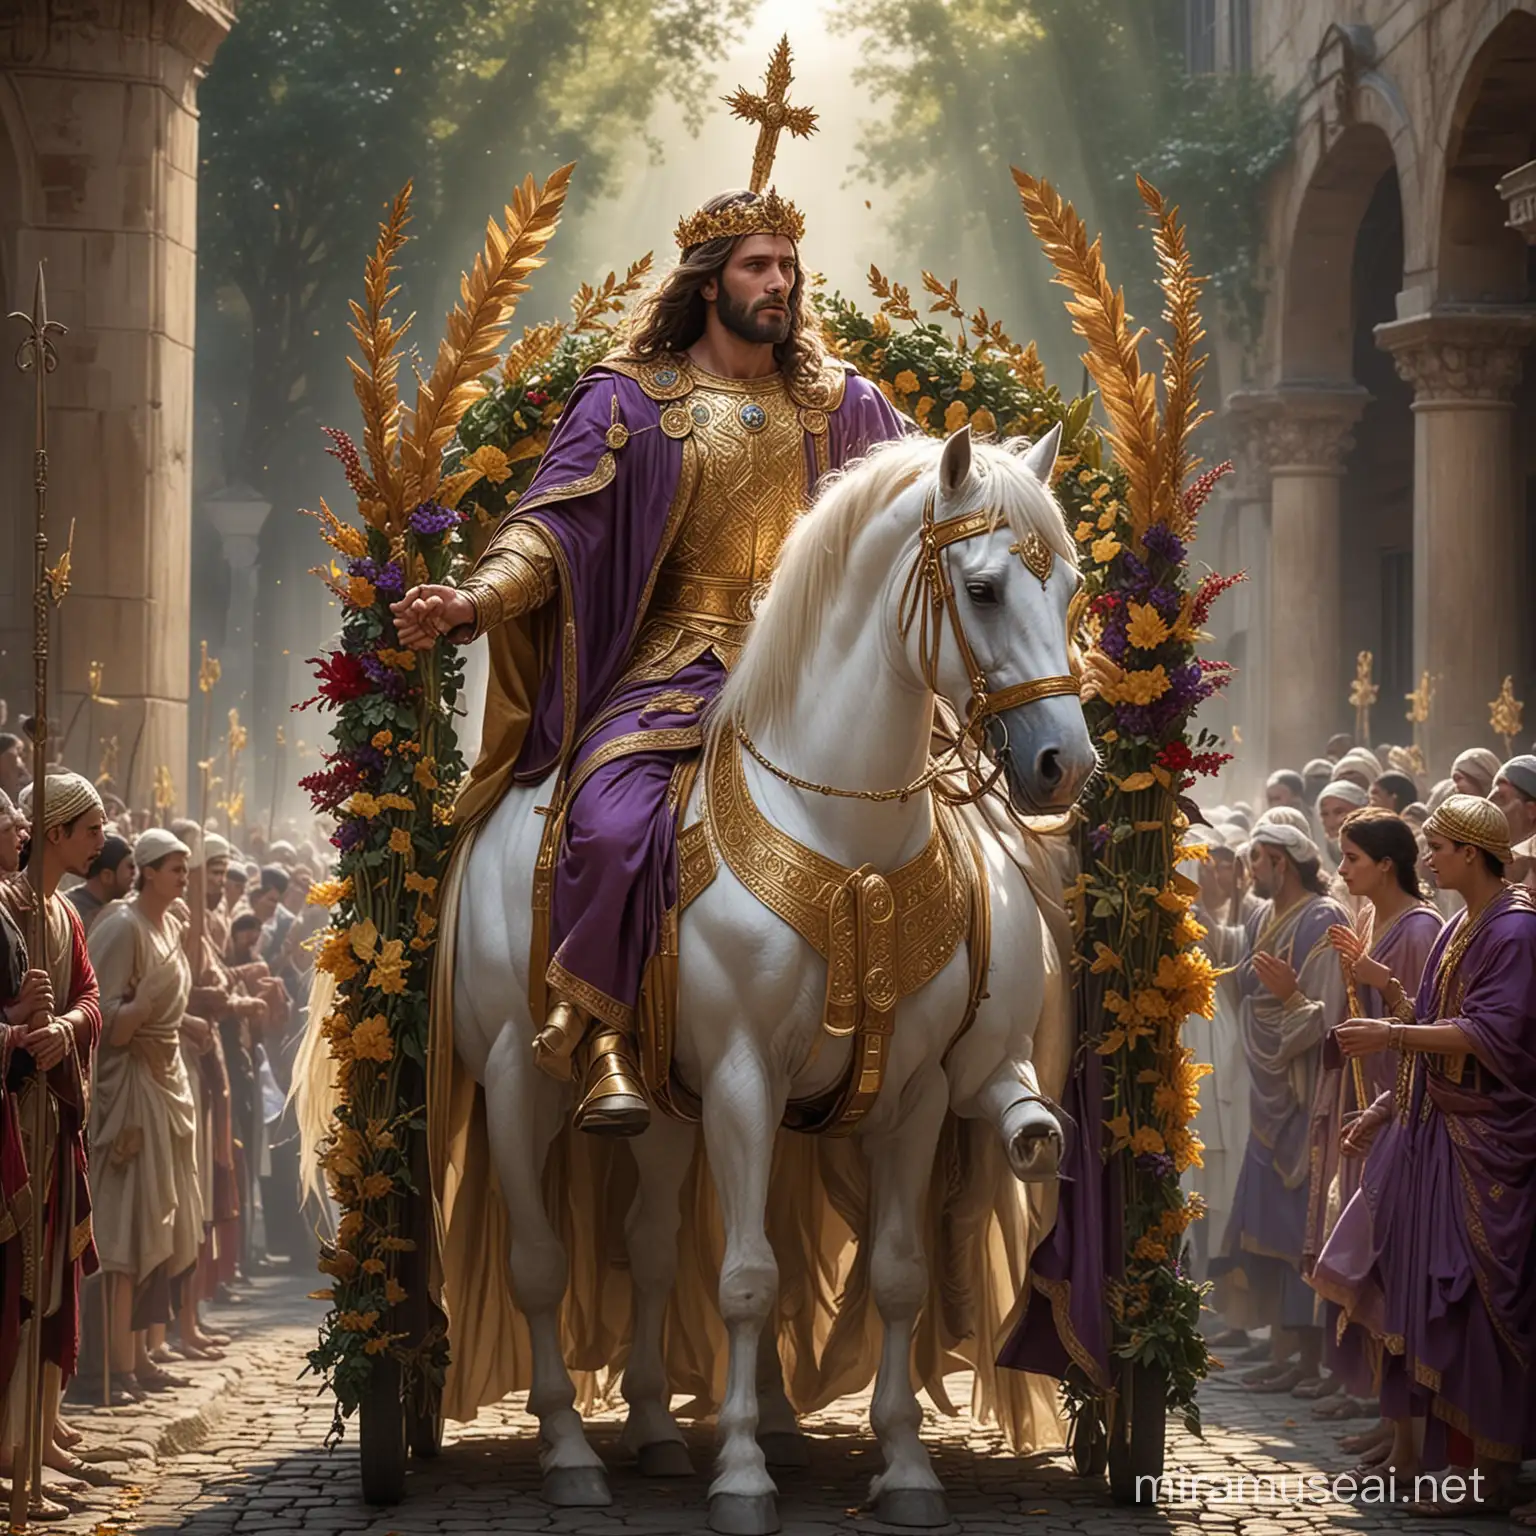 In a scene bathed in celestial light, a towering figure of Jesus christ, reminiscent of the divine, stands tall and victorious in a majestic chariot. His countenance, obscured by the brilliance of radiating light, exudes an aura of transcendence. Clad in regal military attire evoking the grandeur of ancient Rome, his presence commands reverence.

Adorning his head is a resplendent gold wreath, symbolizing his triumph and glory. The golden uniform he wears seems to emit its own ethereal glow, accentuated by a flowing purple robe secured by golden lapels. A jeweled sword rests confidently at his side, a testament to his authority and power.

Beside him, an empty seat in the chariot is adorned with a robe akin to his own, and a golden wreath of leaves stands as a poignant reminder of absent glory. The chariot, a marvel of craftsmanship adorned with precious gems, is pulled by two noble white horses, their muscular forms propelled forward by golden harnesses.

Behind the chariot, a figure bound in chains, naked and defeated, is dragged along the cobbled streets. His bowed head and dejected demeanor speak of his submission to the triumphant figure ahead. In his wake, a host of similarly bound creatures, pale and diminutive, bear the weight of their captivity.

Yet, amidst the spectacle, a diverse company of onlookers from every tribe and nation gathers. Cloaked in white robes and waving palm branches, they exude jubilation and exaltation. Their cheers and applause fill the air as they witness the triumphant procession, their joy palpable.

Interwoven among them are angelic beings, their celestial forms adding to the sense of awe and wonder. As they watch the spectacle unfold upon streets paved with golden cobblestones, they join in the chorus of celebration, a testament to the divine victory that has captivated them all.





